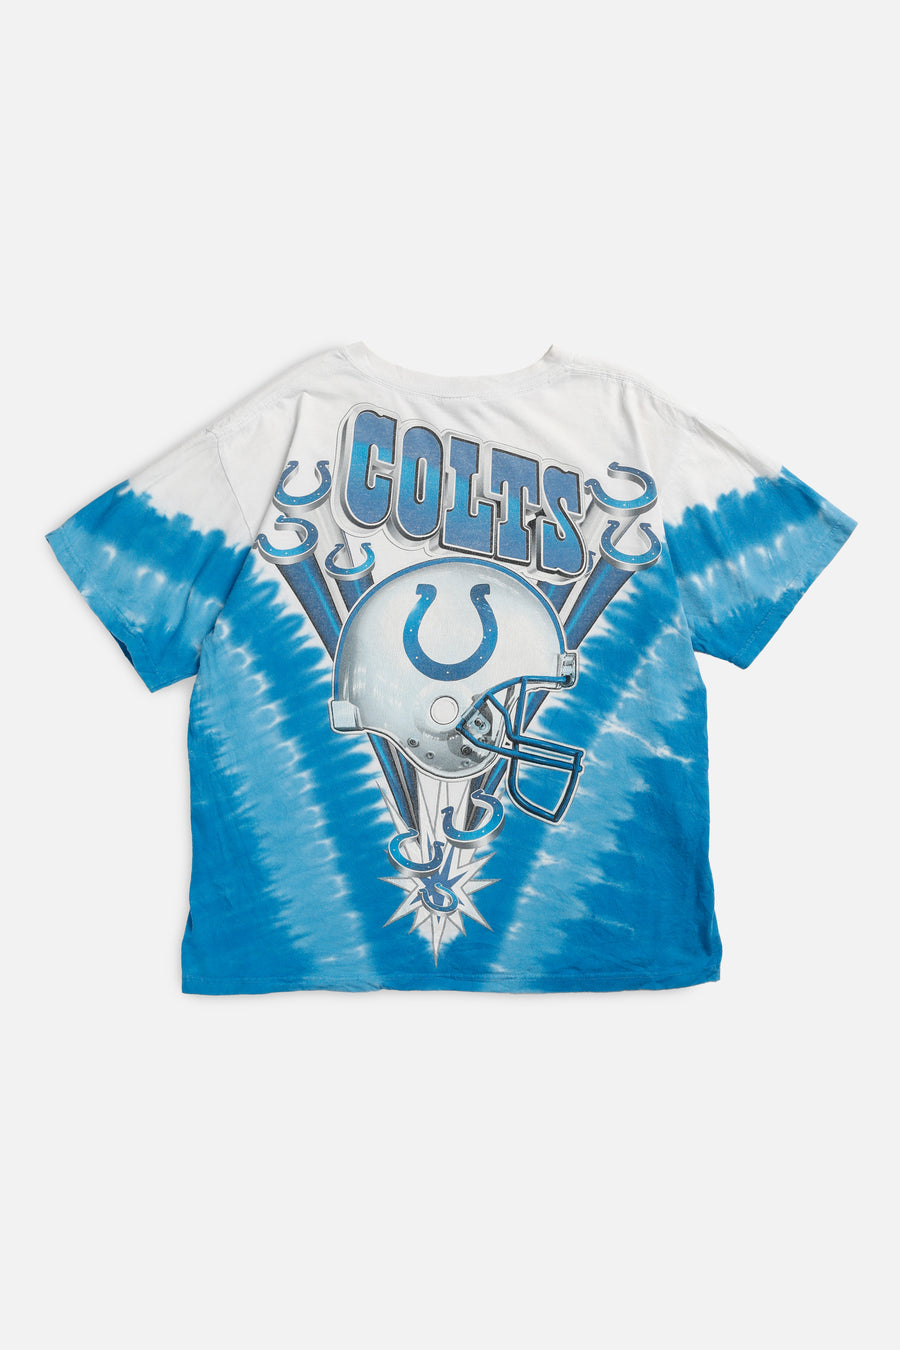 Vintage Indianapolis Colts NFL Tee - M